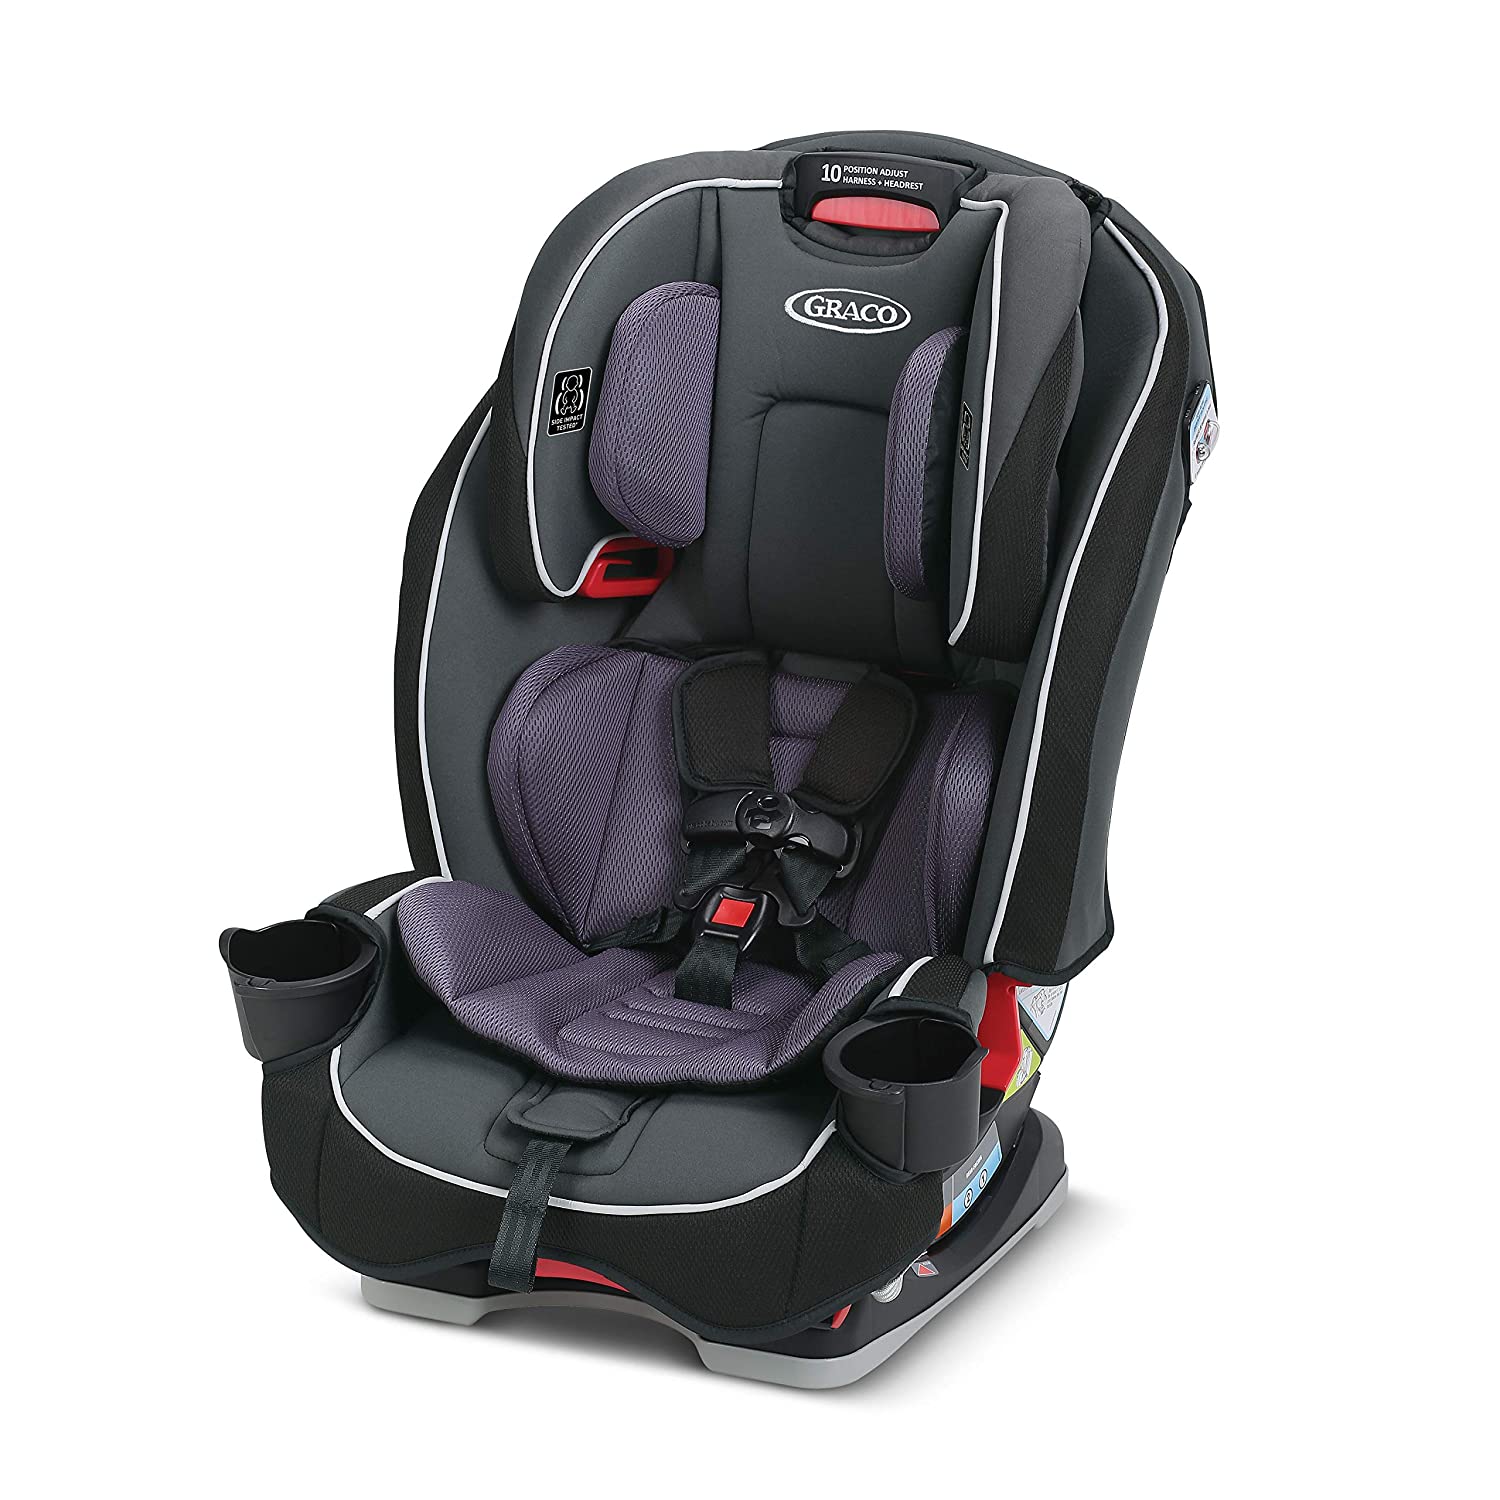  6. Infant Car Seat 3 in 1, Graco brand, Compact Design Saves Space, Annabelle Color 